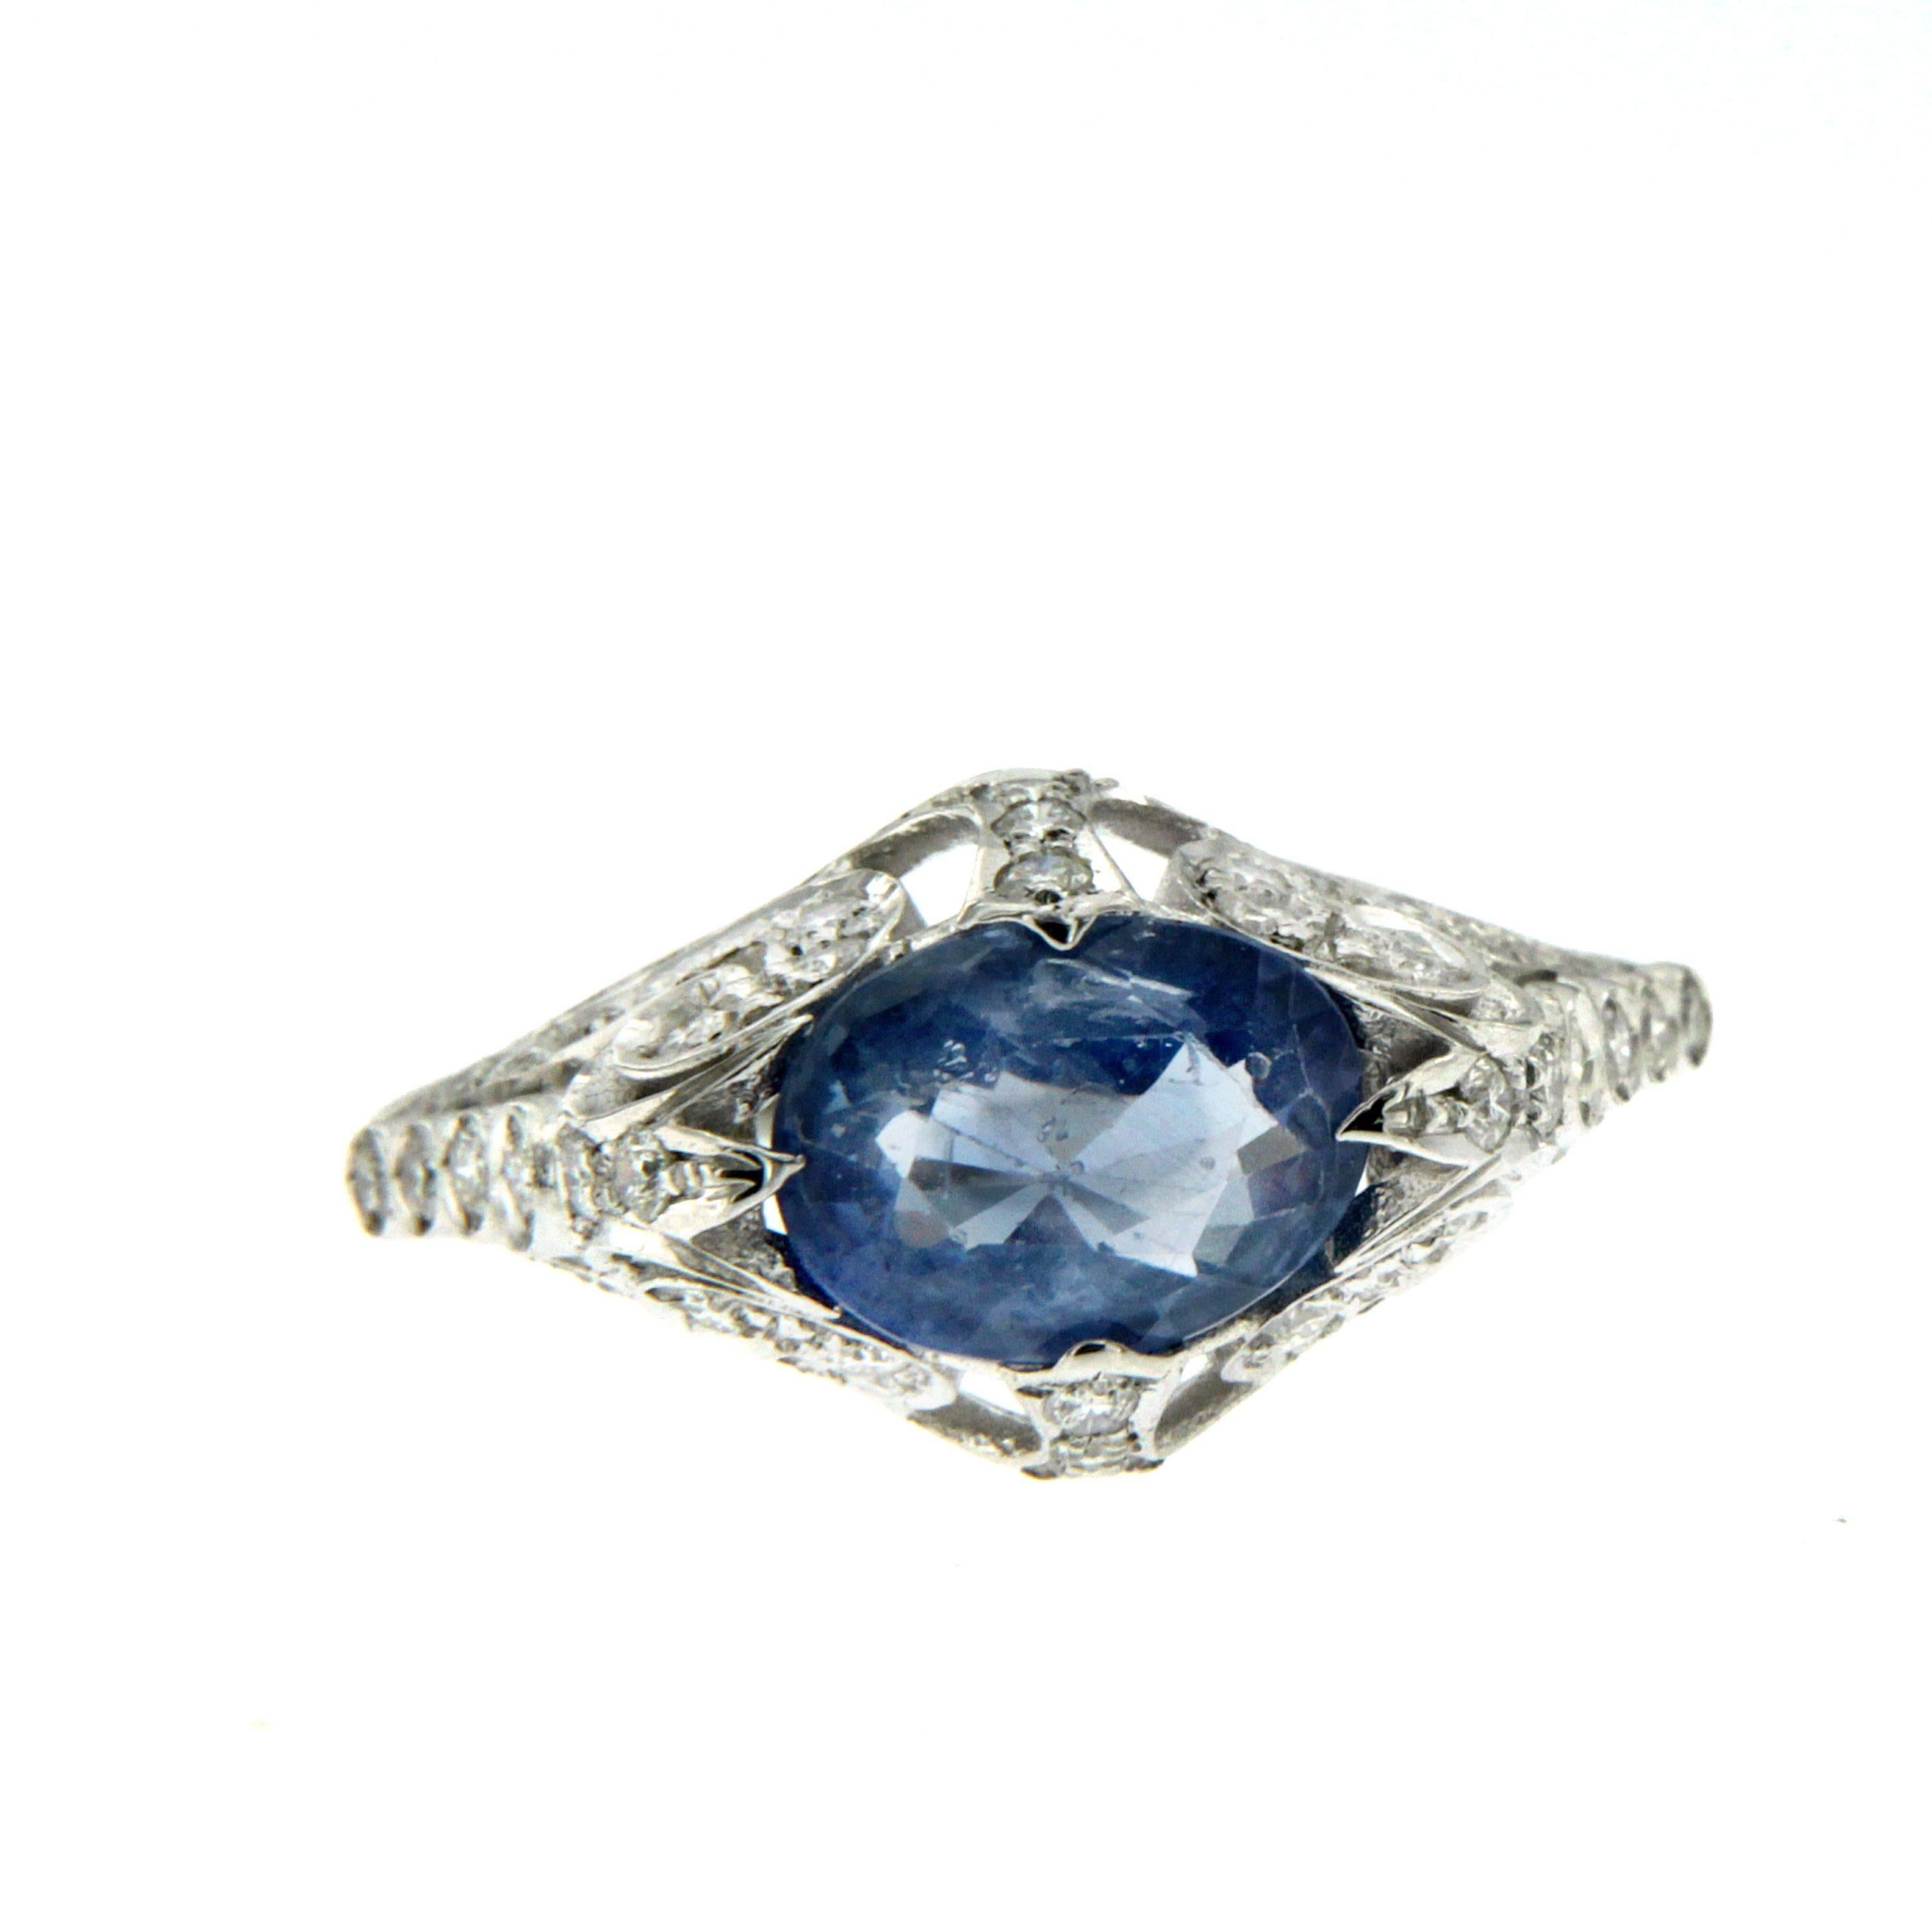 A sapphire and diamond ring, set with an oval mixed cut Ceylon sapphire, weighing an approx. 2.36cts, surrounded by old  mine-cut diamonds, weighing an approx. total of 0.75cts, with diamond set shoulders, mounted in 18k white gold.

Gross weight: